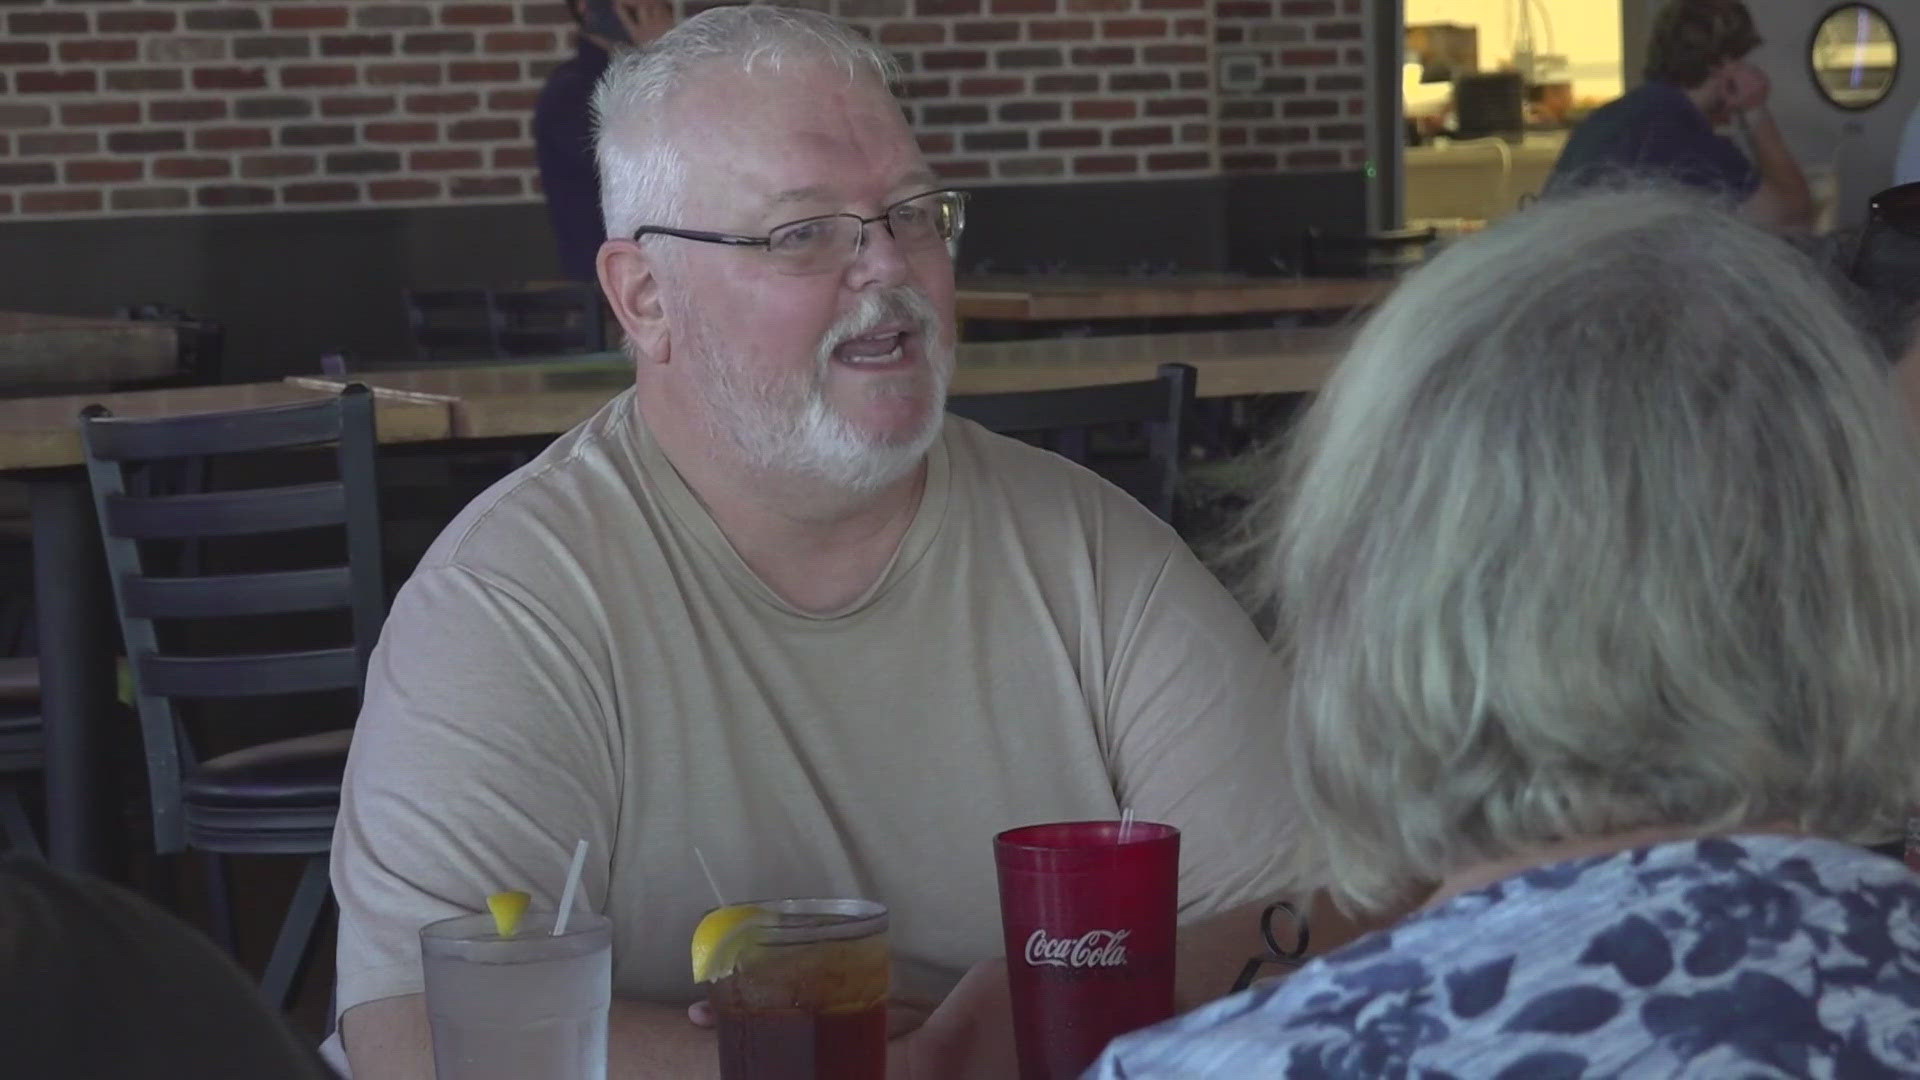 Michael Glynn ate alone every Friday until he posted a lunch invite to his neighbors. Now he eats out with more than a dozen people a week.